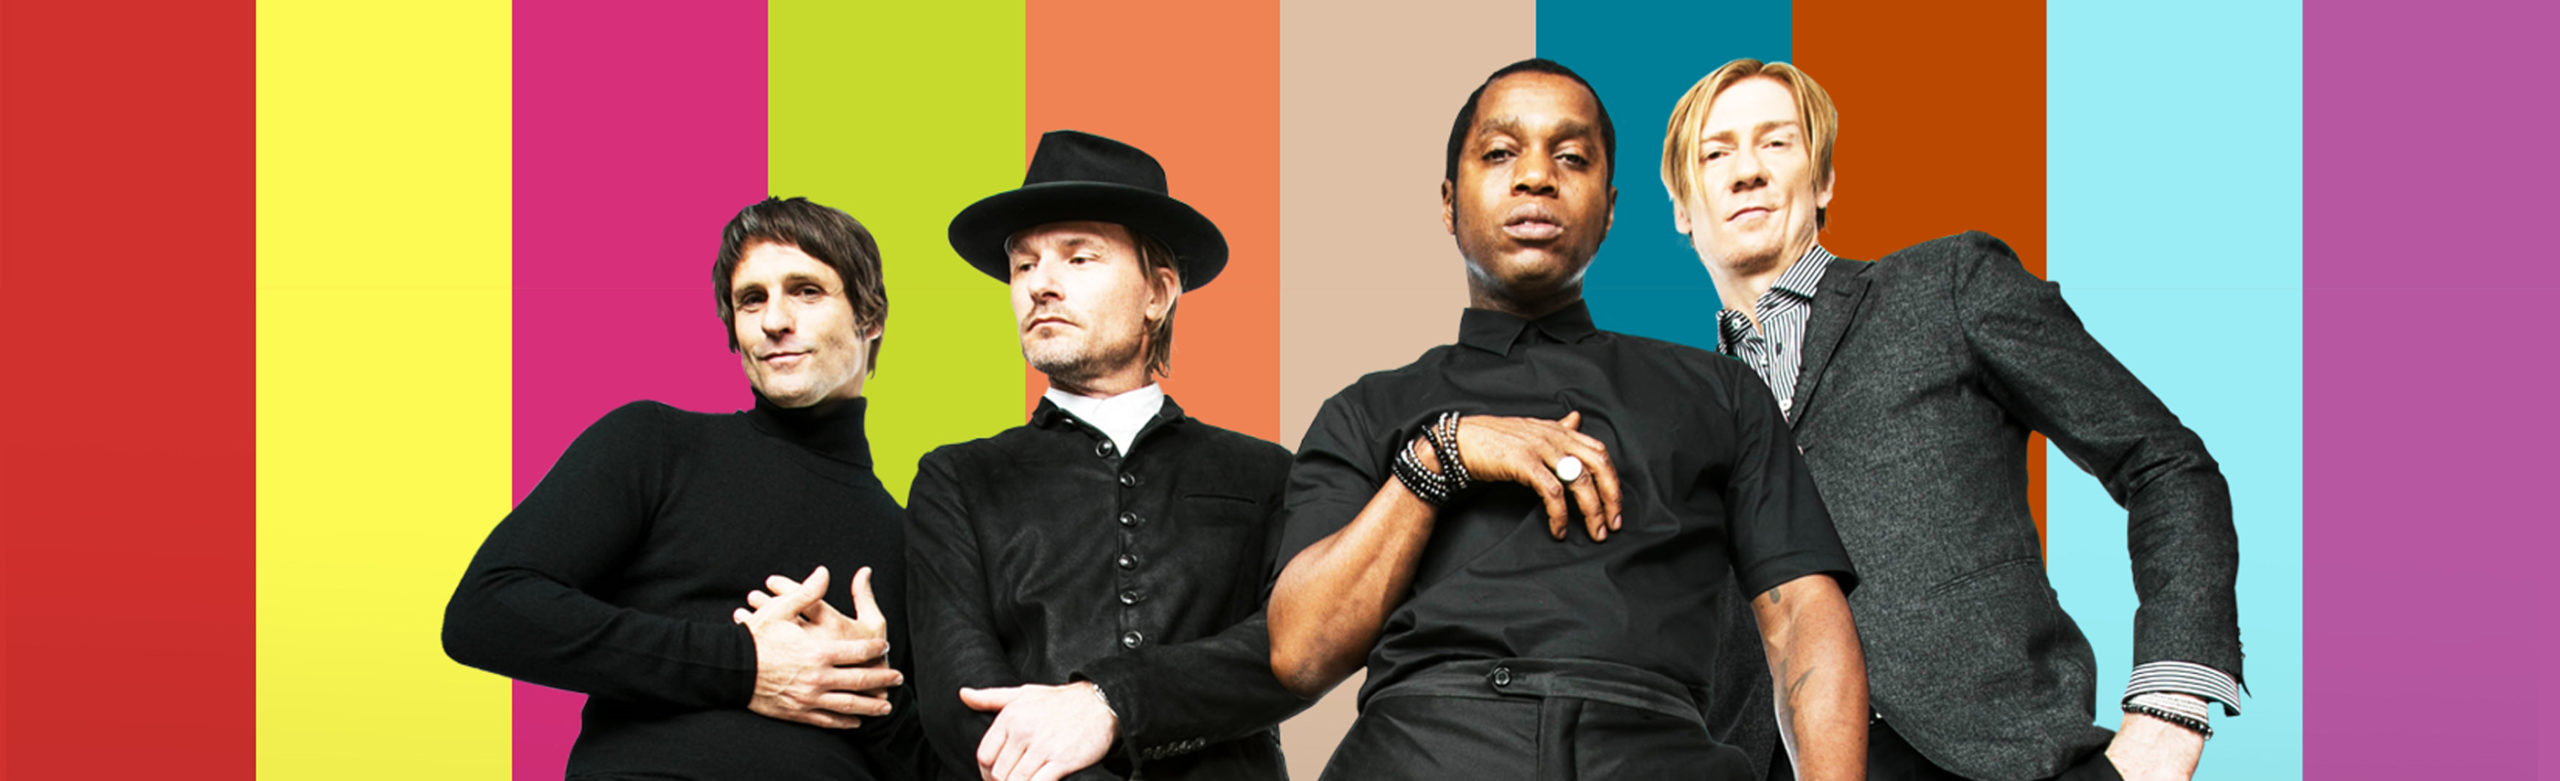 Swaggering Rock and R&B: Vintage Trouble Confirms Missoula Concert Image